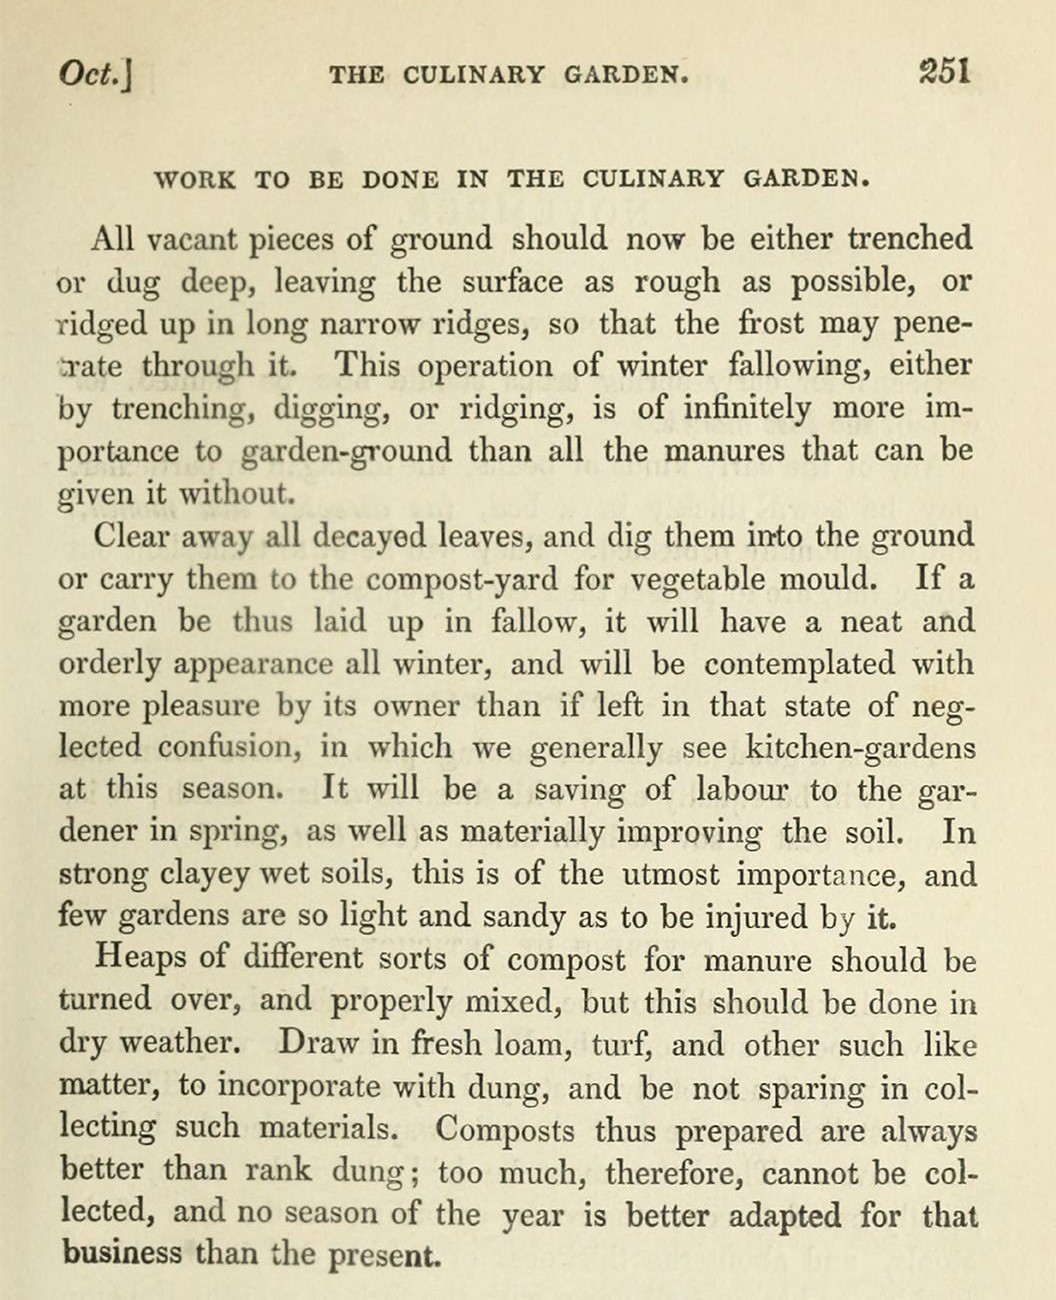 A page from Charles McIntosh’s ‘Practical Gardener’, published in 1836, which includes advice on managing compost